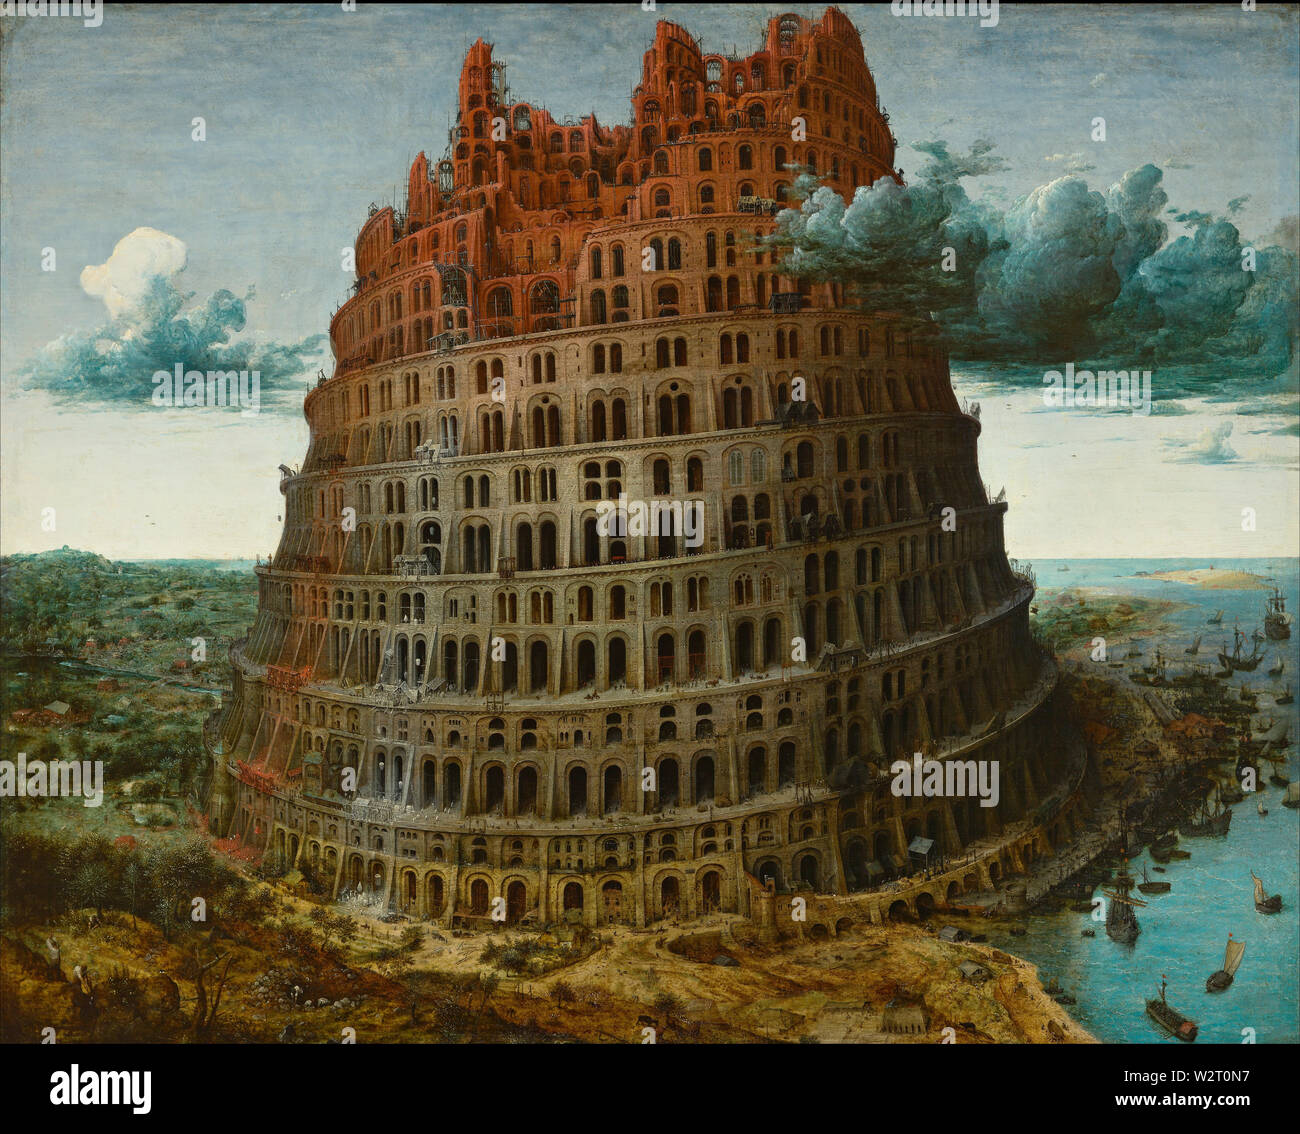 The Tower of Babel (Rotterdam, The Little Tower of Babel circa 1563-1565) painting by Pieter Bruegel (Brueghel) the Elder (I) Very high quality image Stock Photo